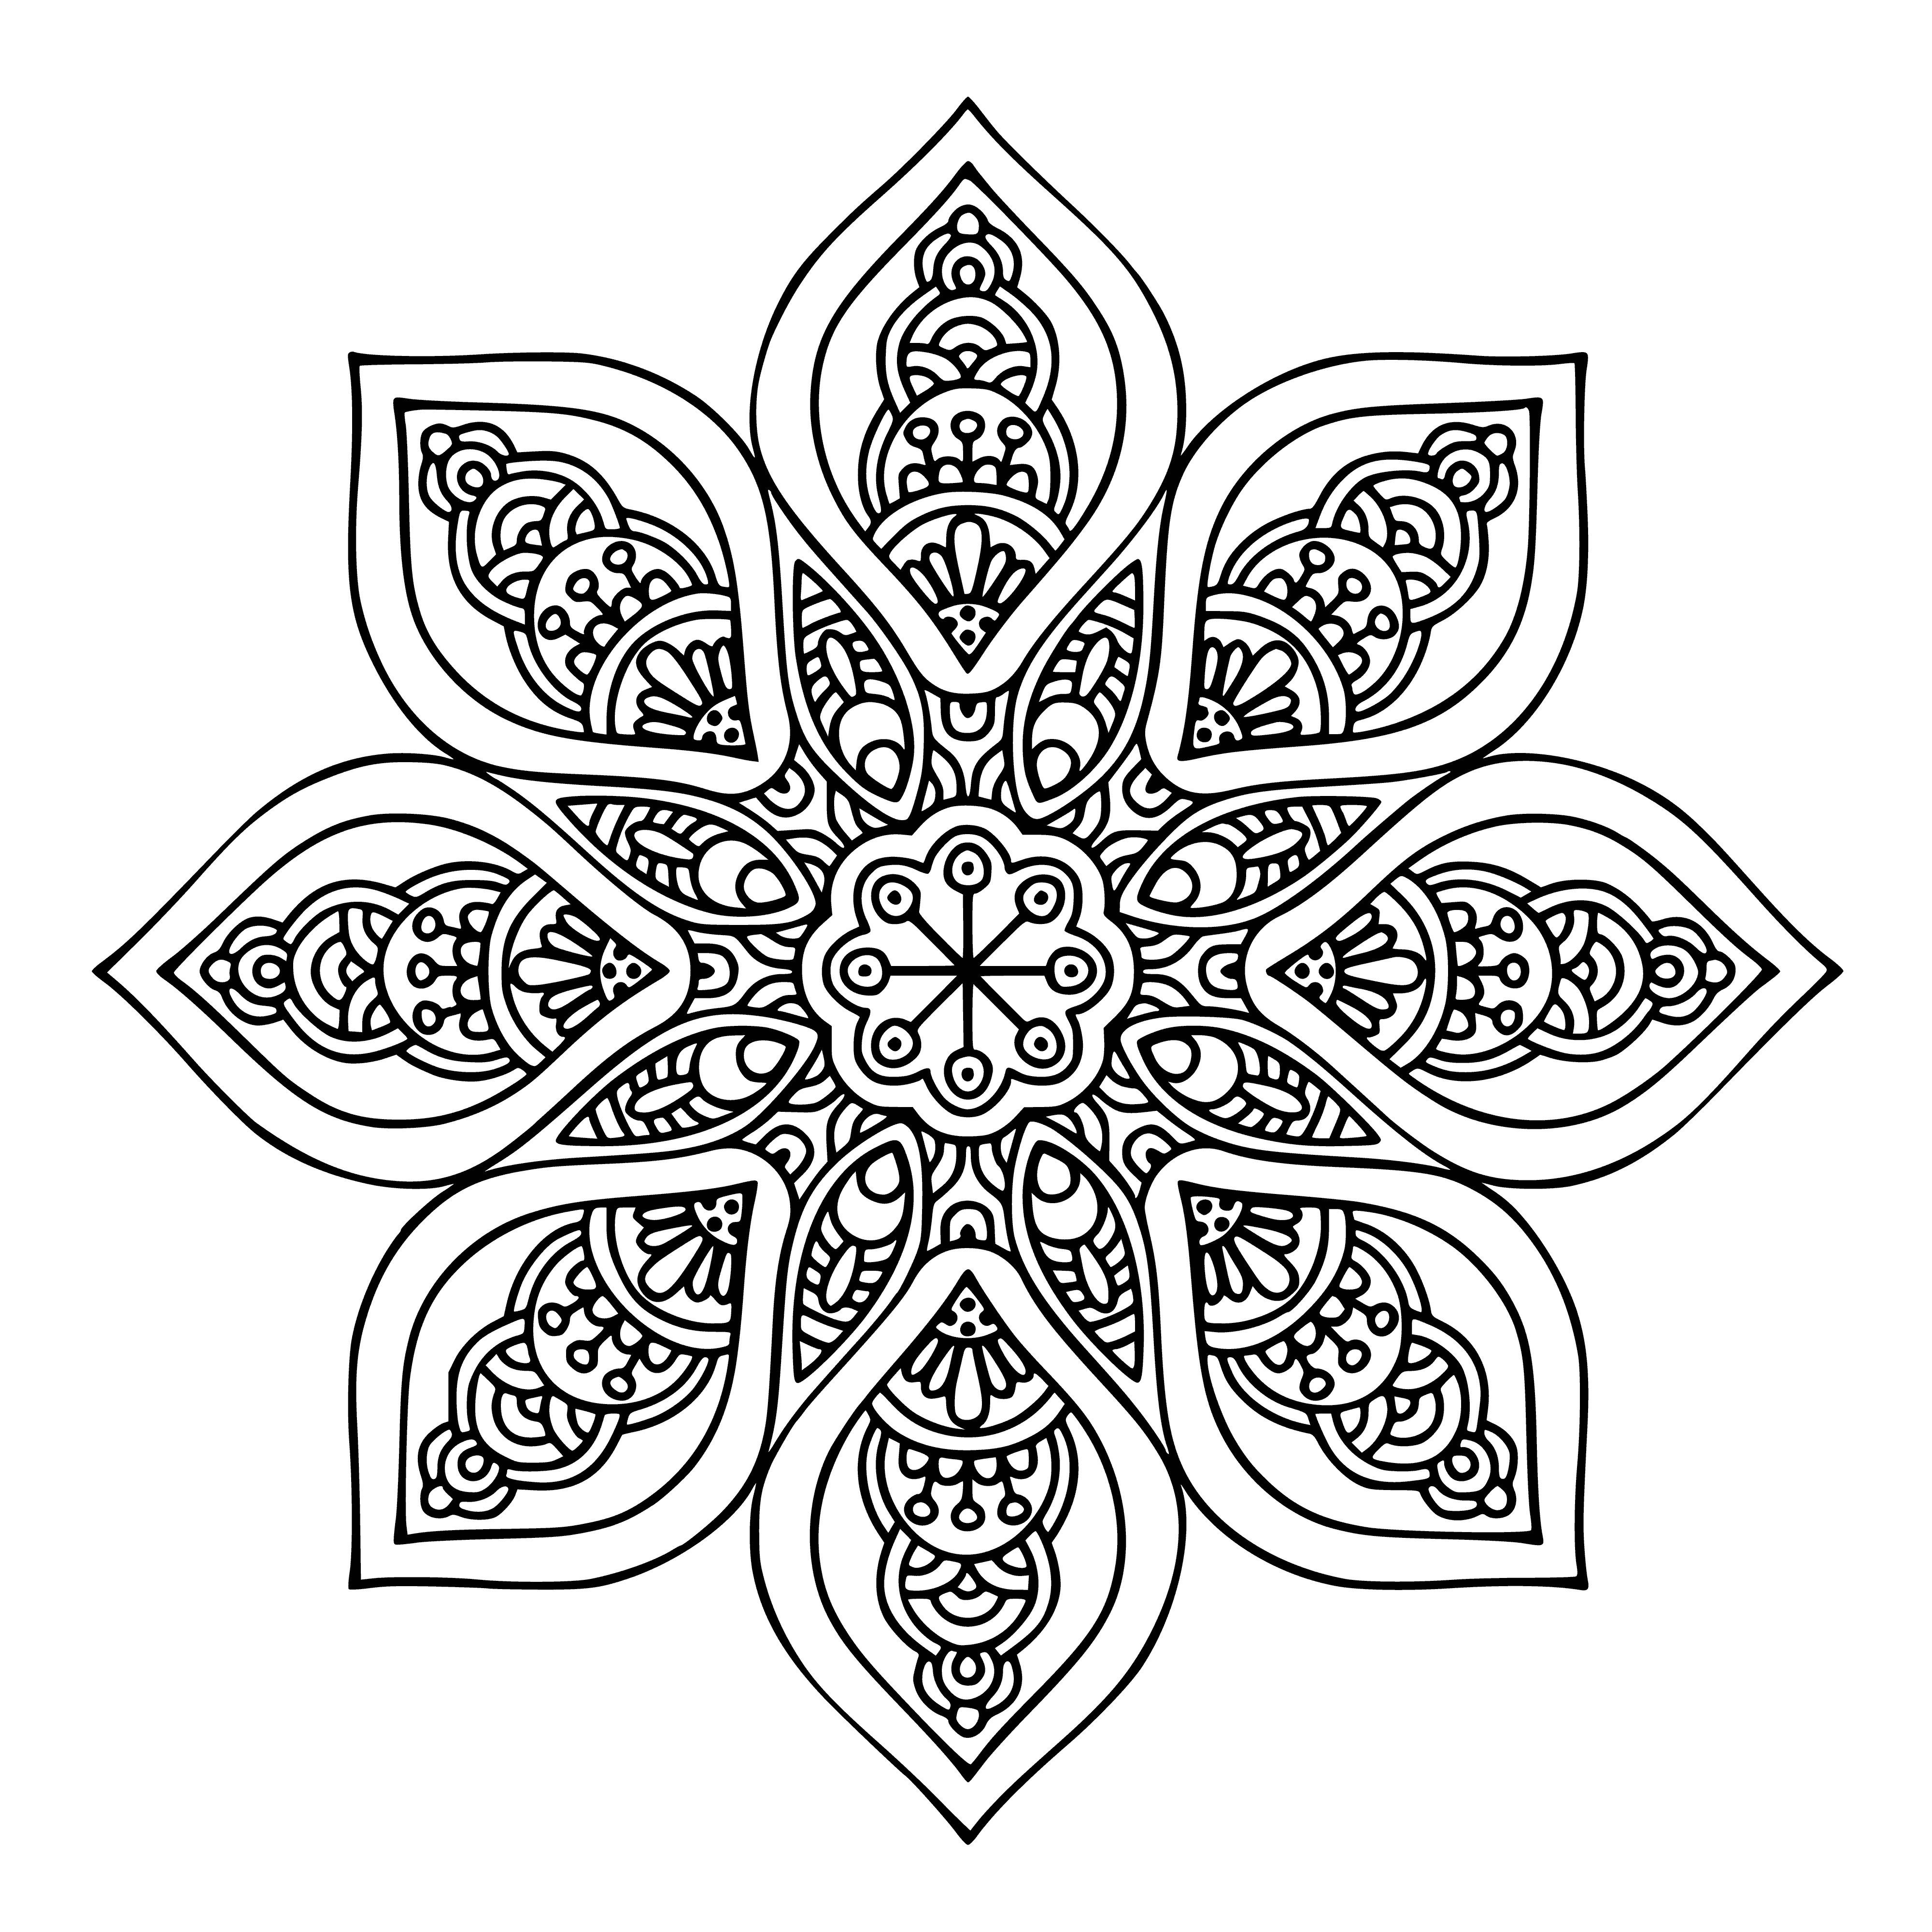 coloring page: Mandala coloring page has circles, triangles and flowers. Different sizes, lines and colors. Petals for the flowers. #coloringpages #mandala